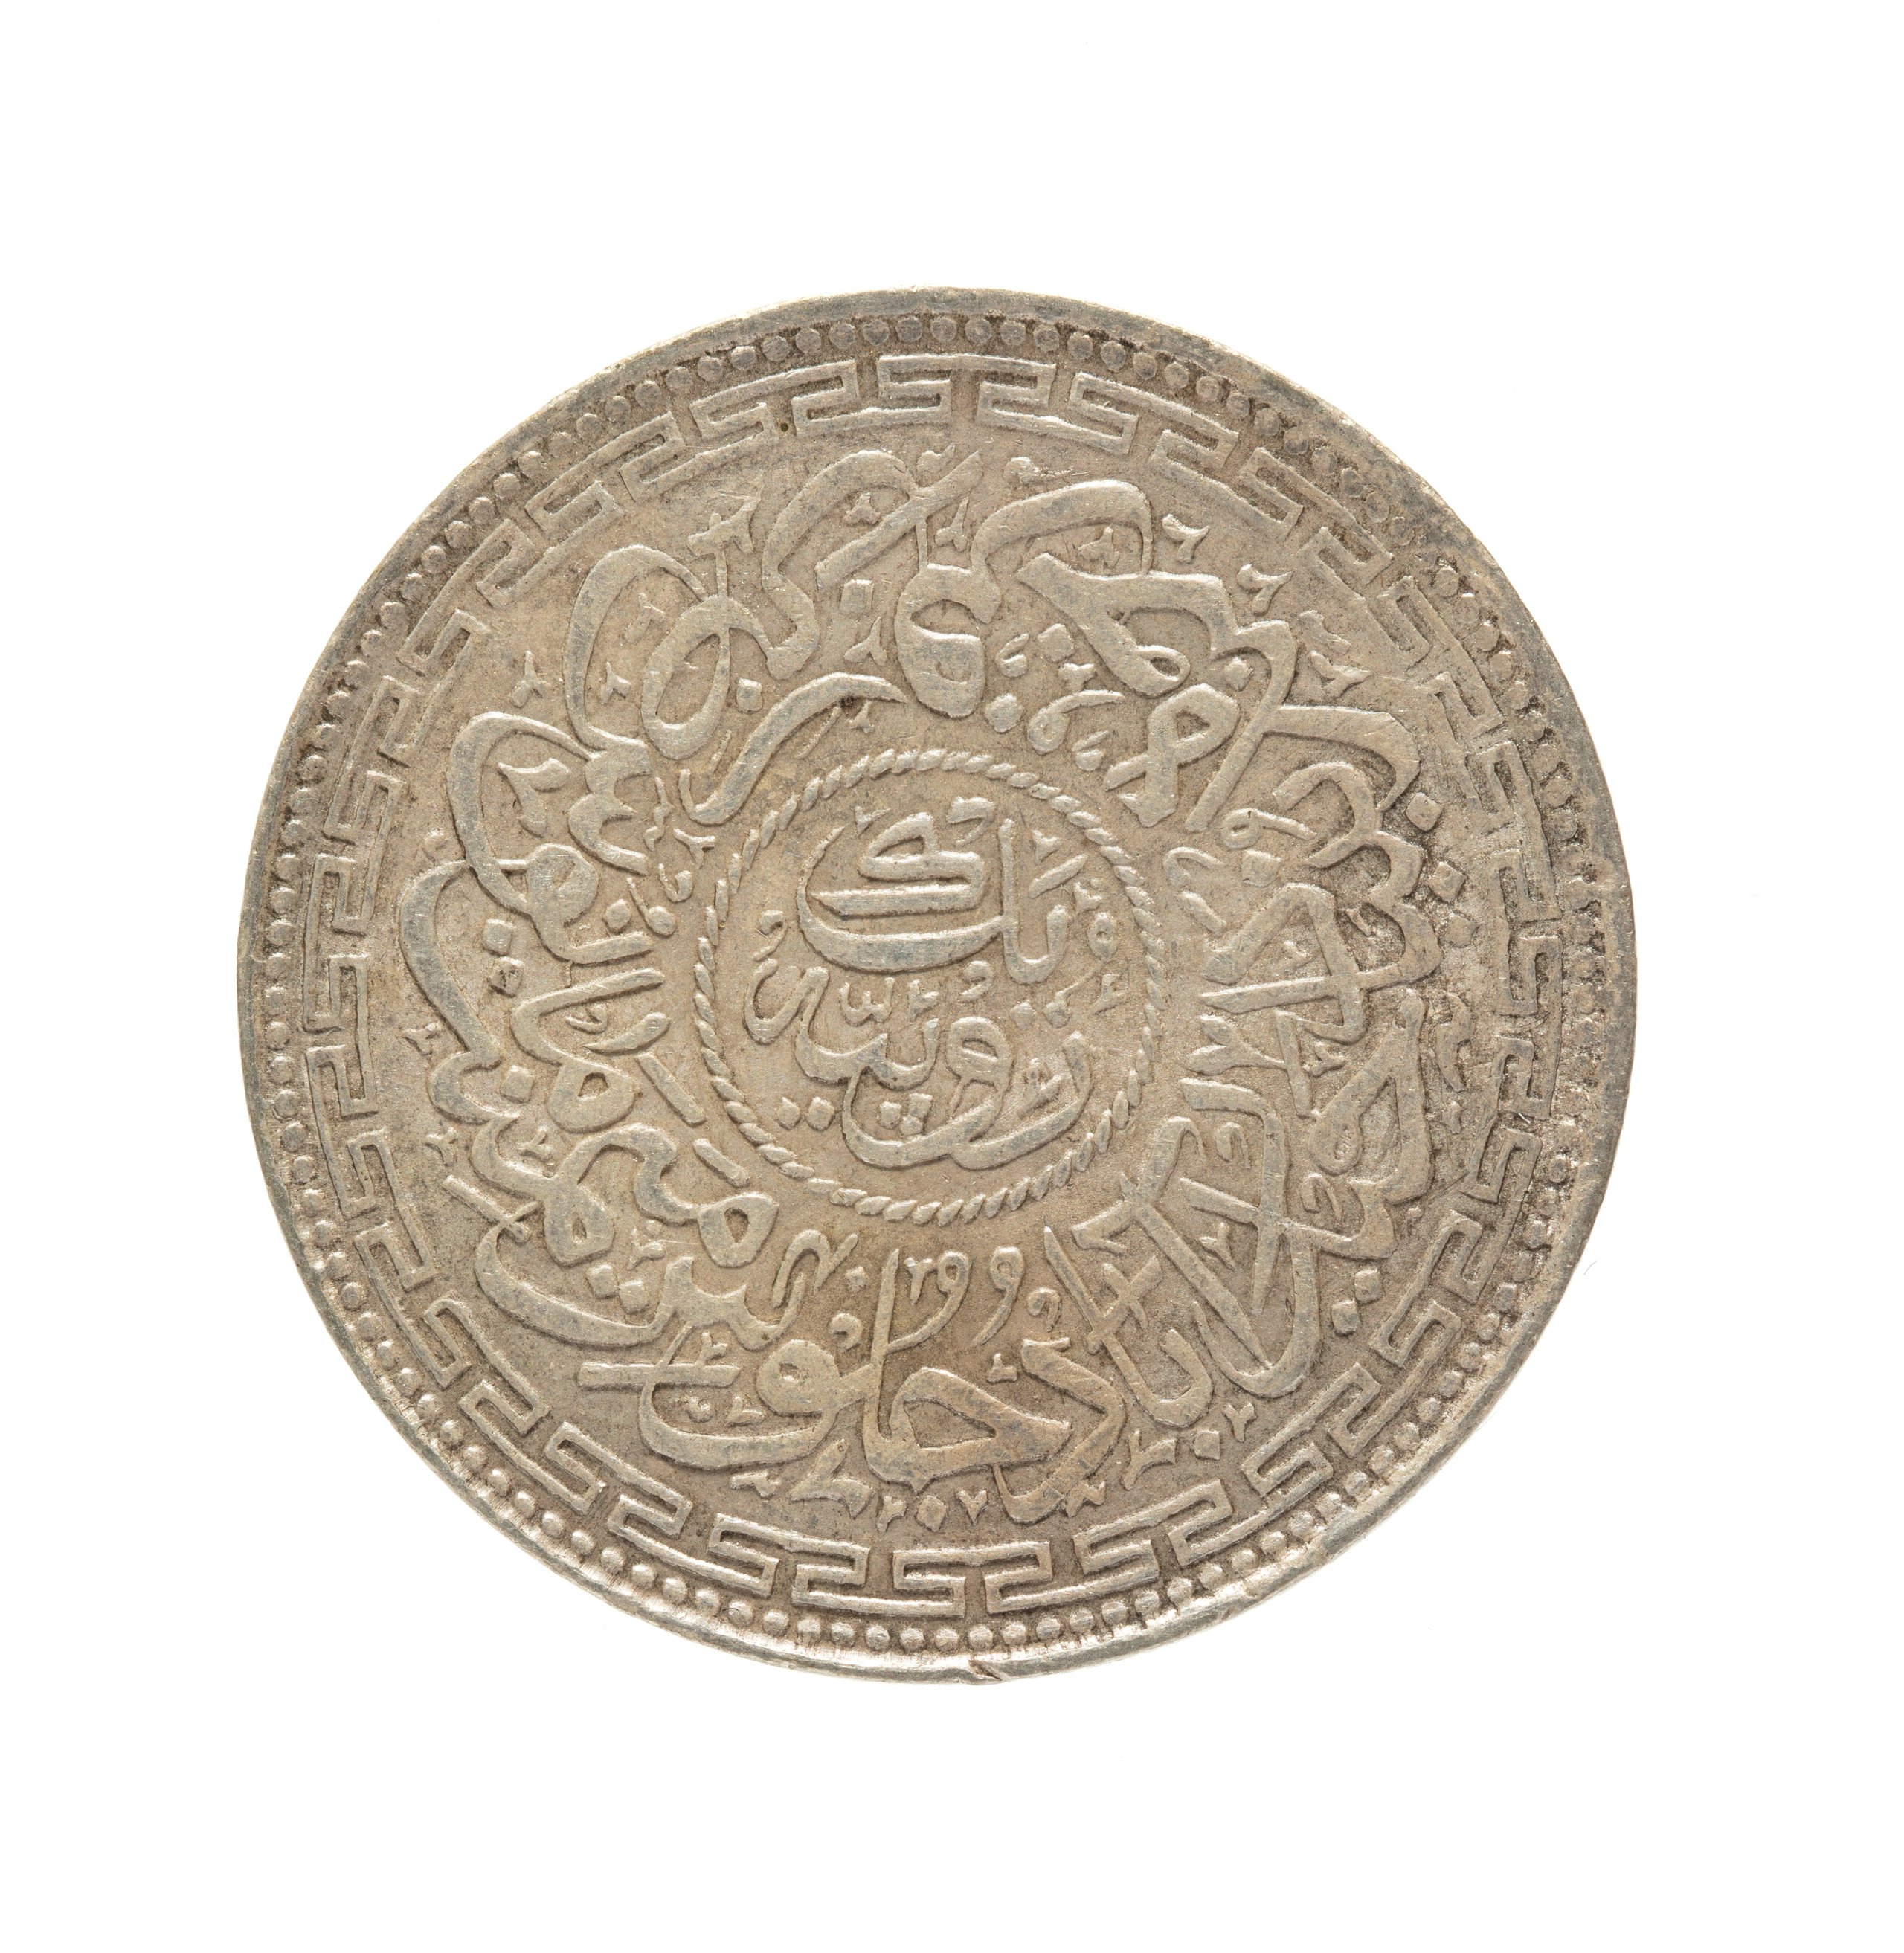 One Rupee coin from the Princely State of Hyderabad